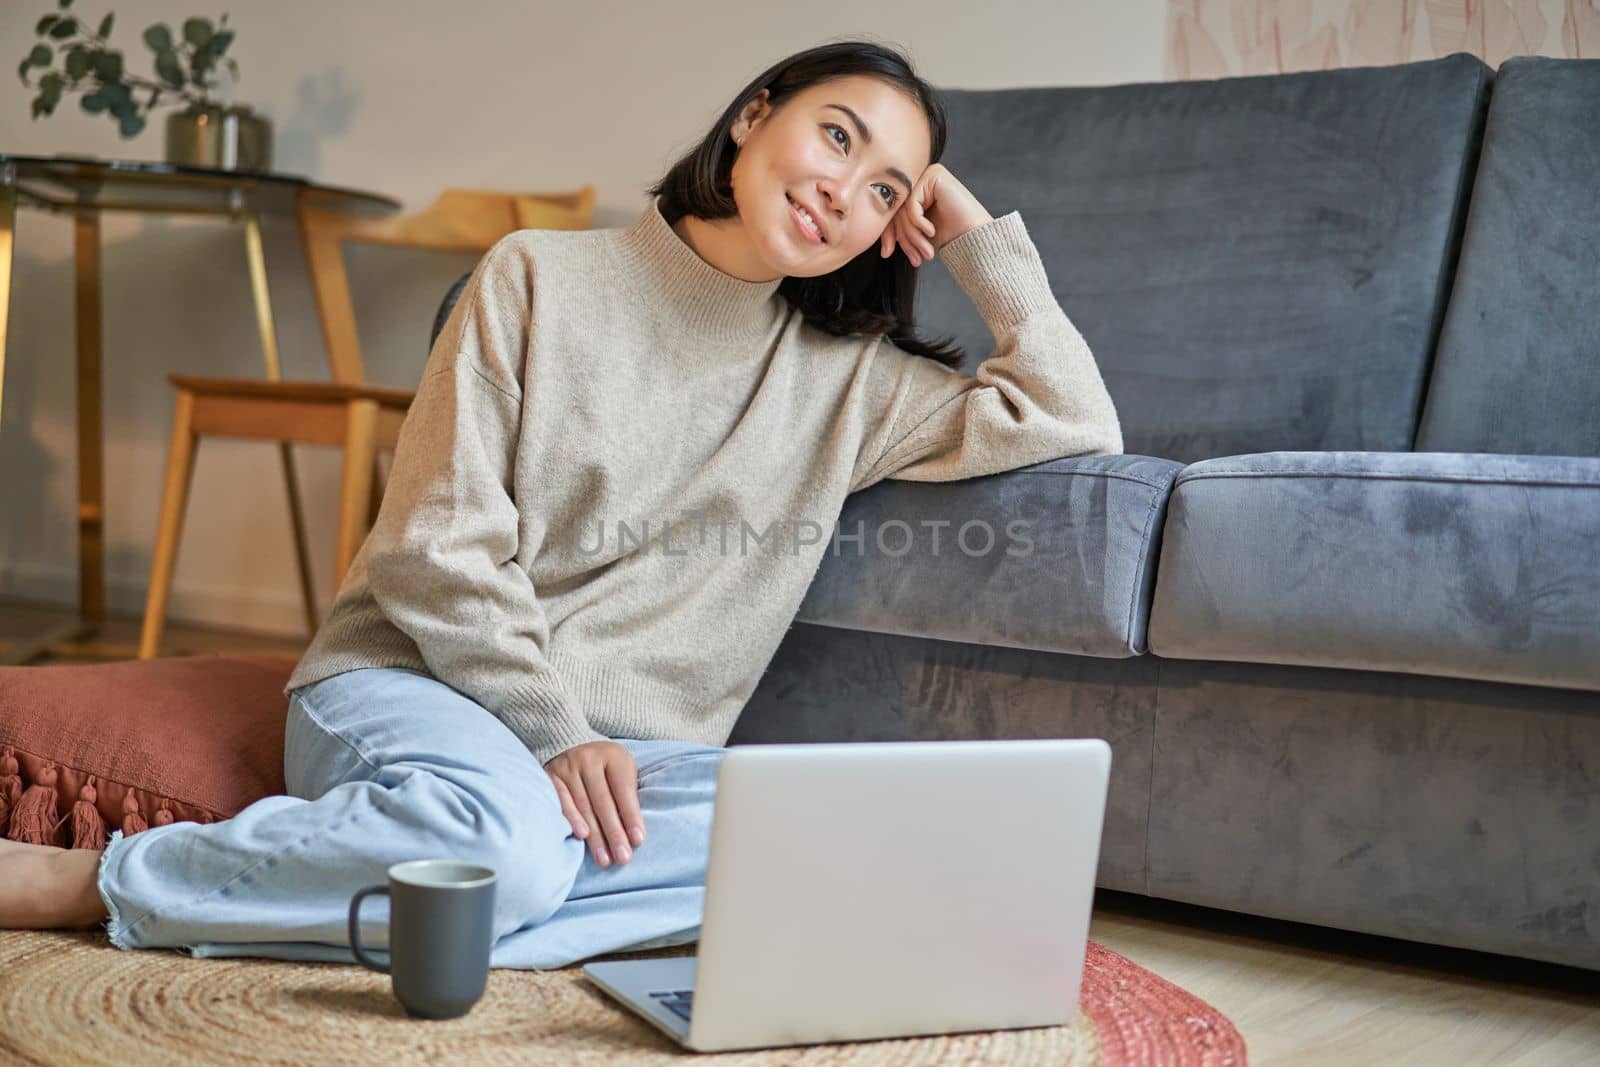 Portrait of dreamy woman sitting with laptop on floor, watching on computer and drinking coffee, enjoying cozy days at home.